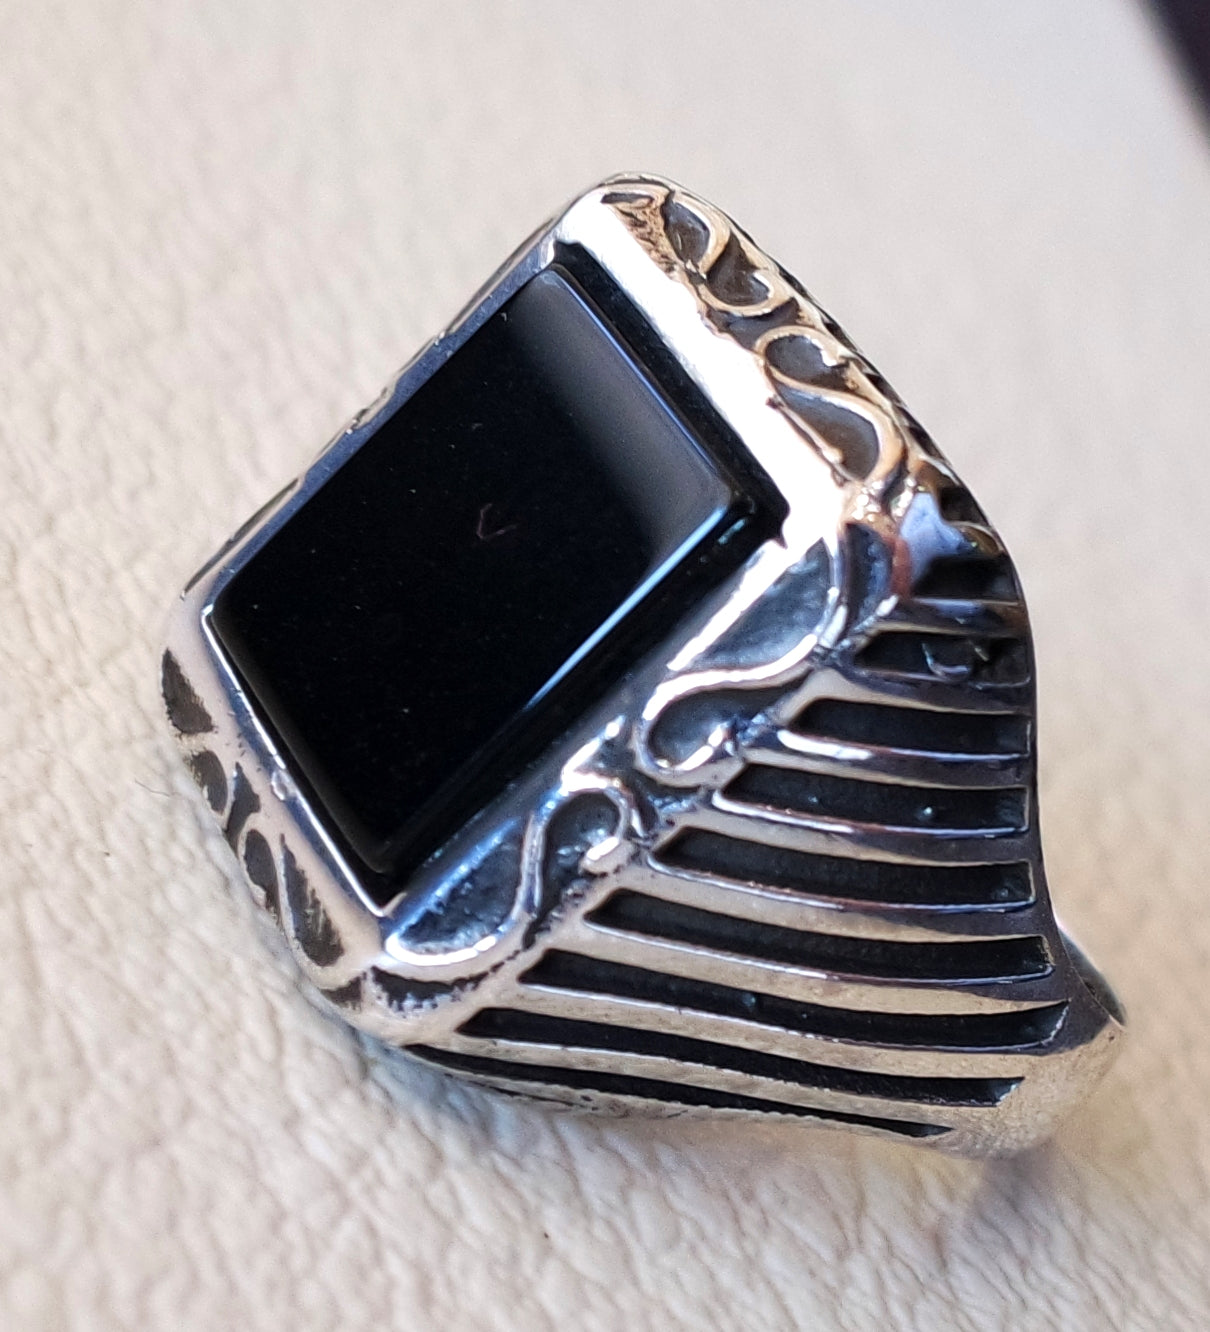 Rectangular silver onyx black aqeeq flat natural agate gemstone men ottoman style ring sterling silver 925 jewelry all sizes fast shipping